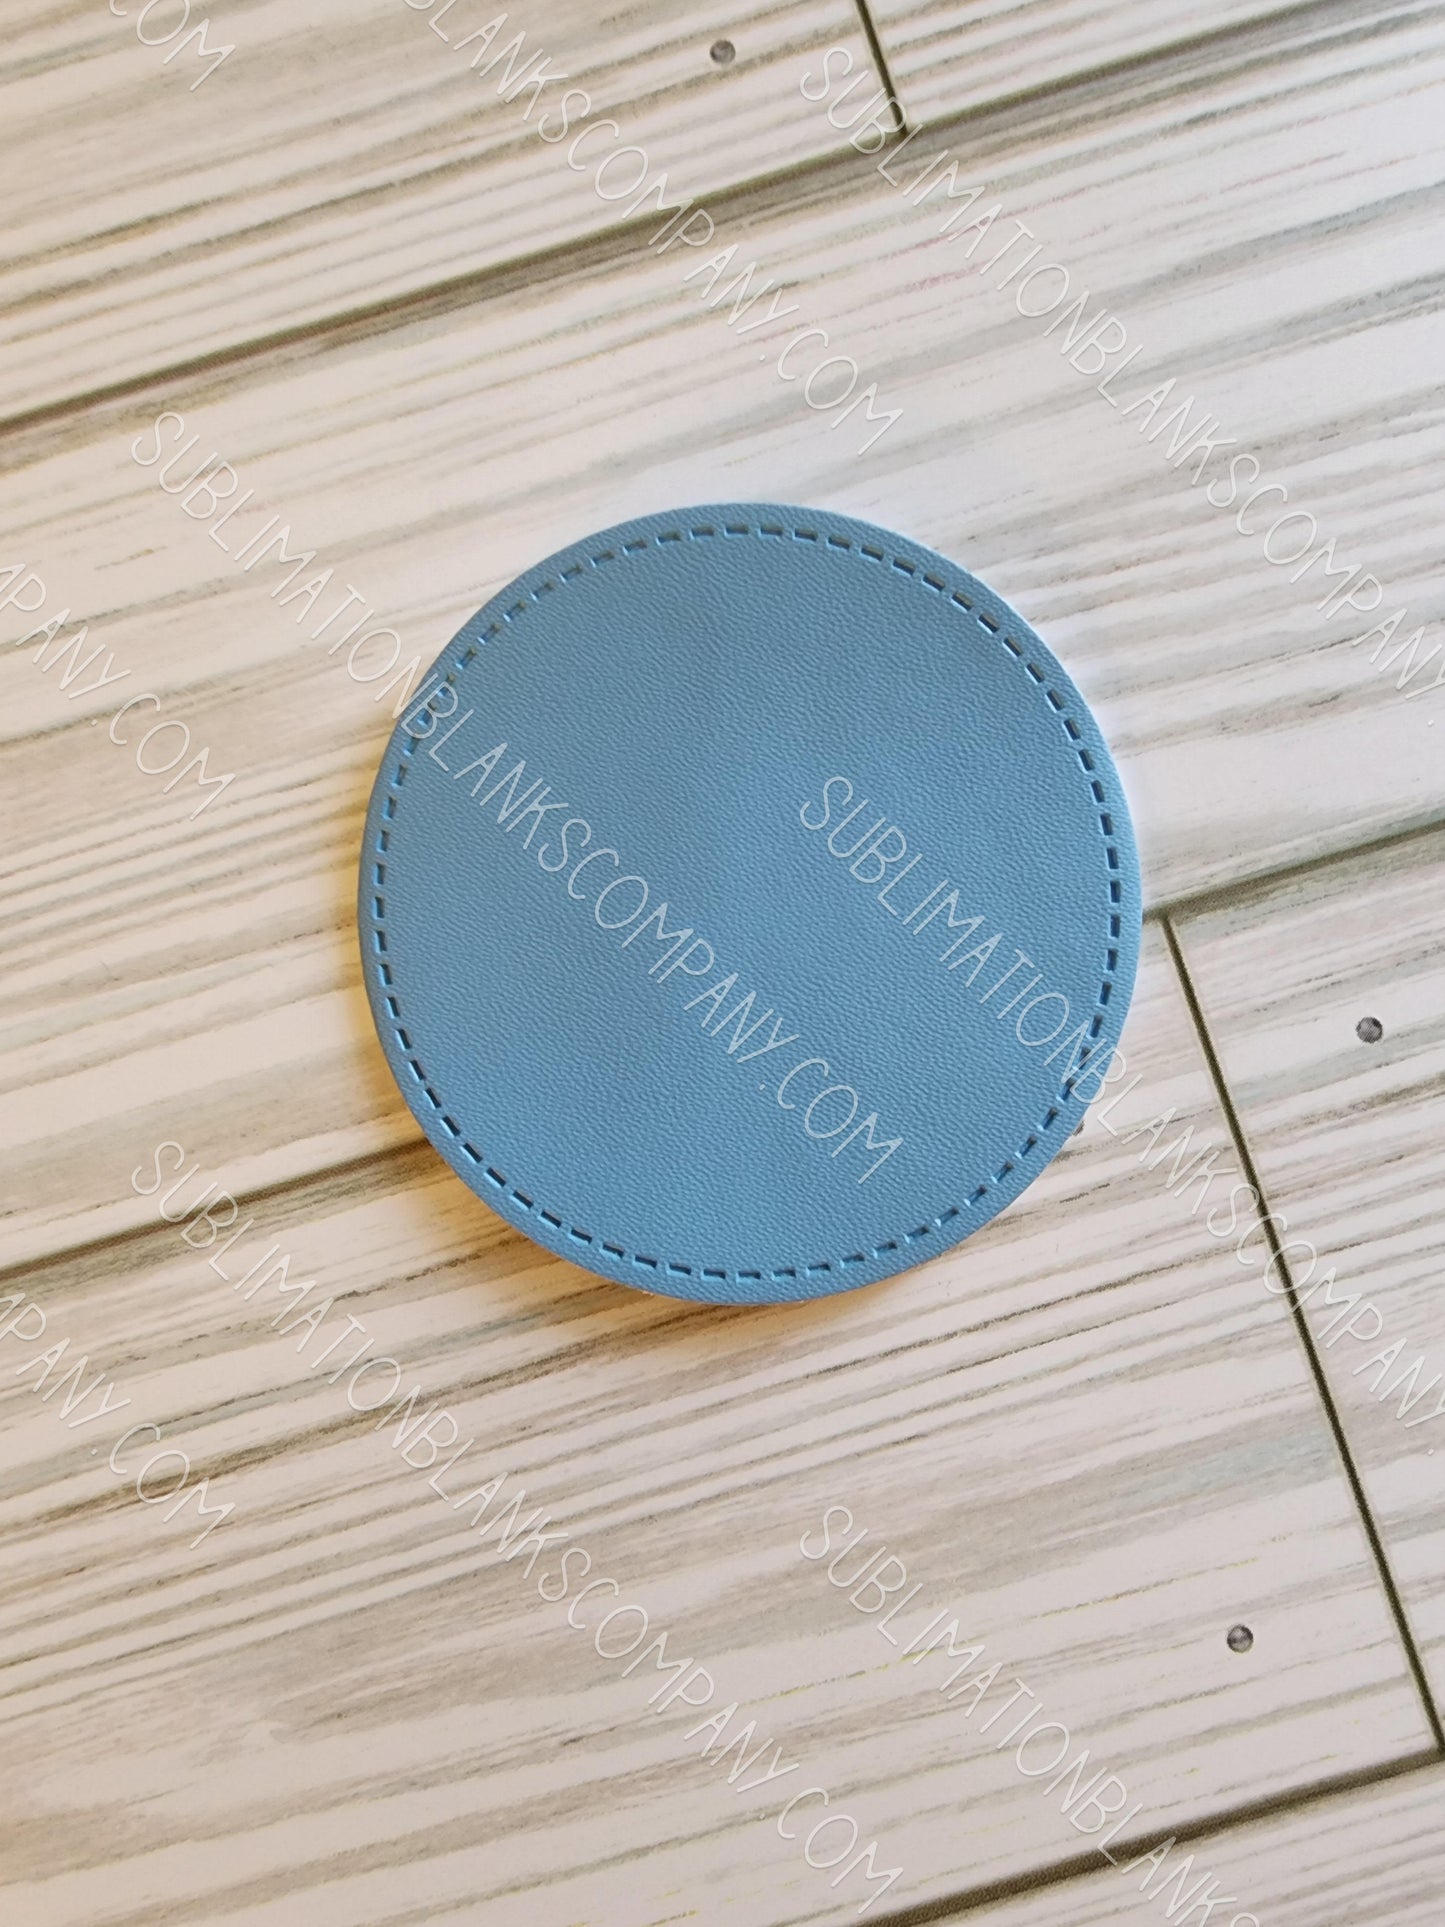 Circle Blue Faux Leather Hat Patch Sublimation Blank! 2.5" Round! PPU Leather. Laserable!